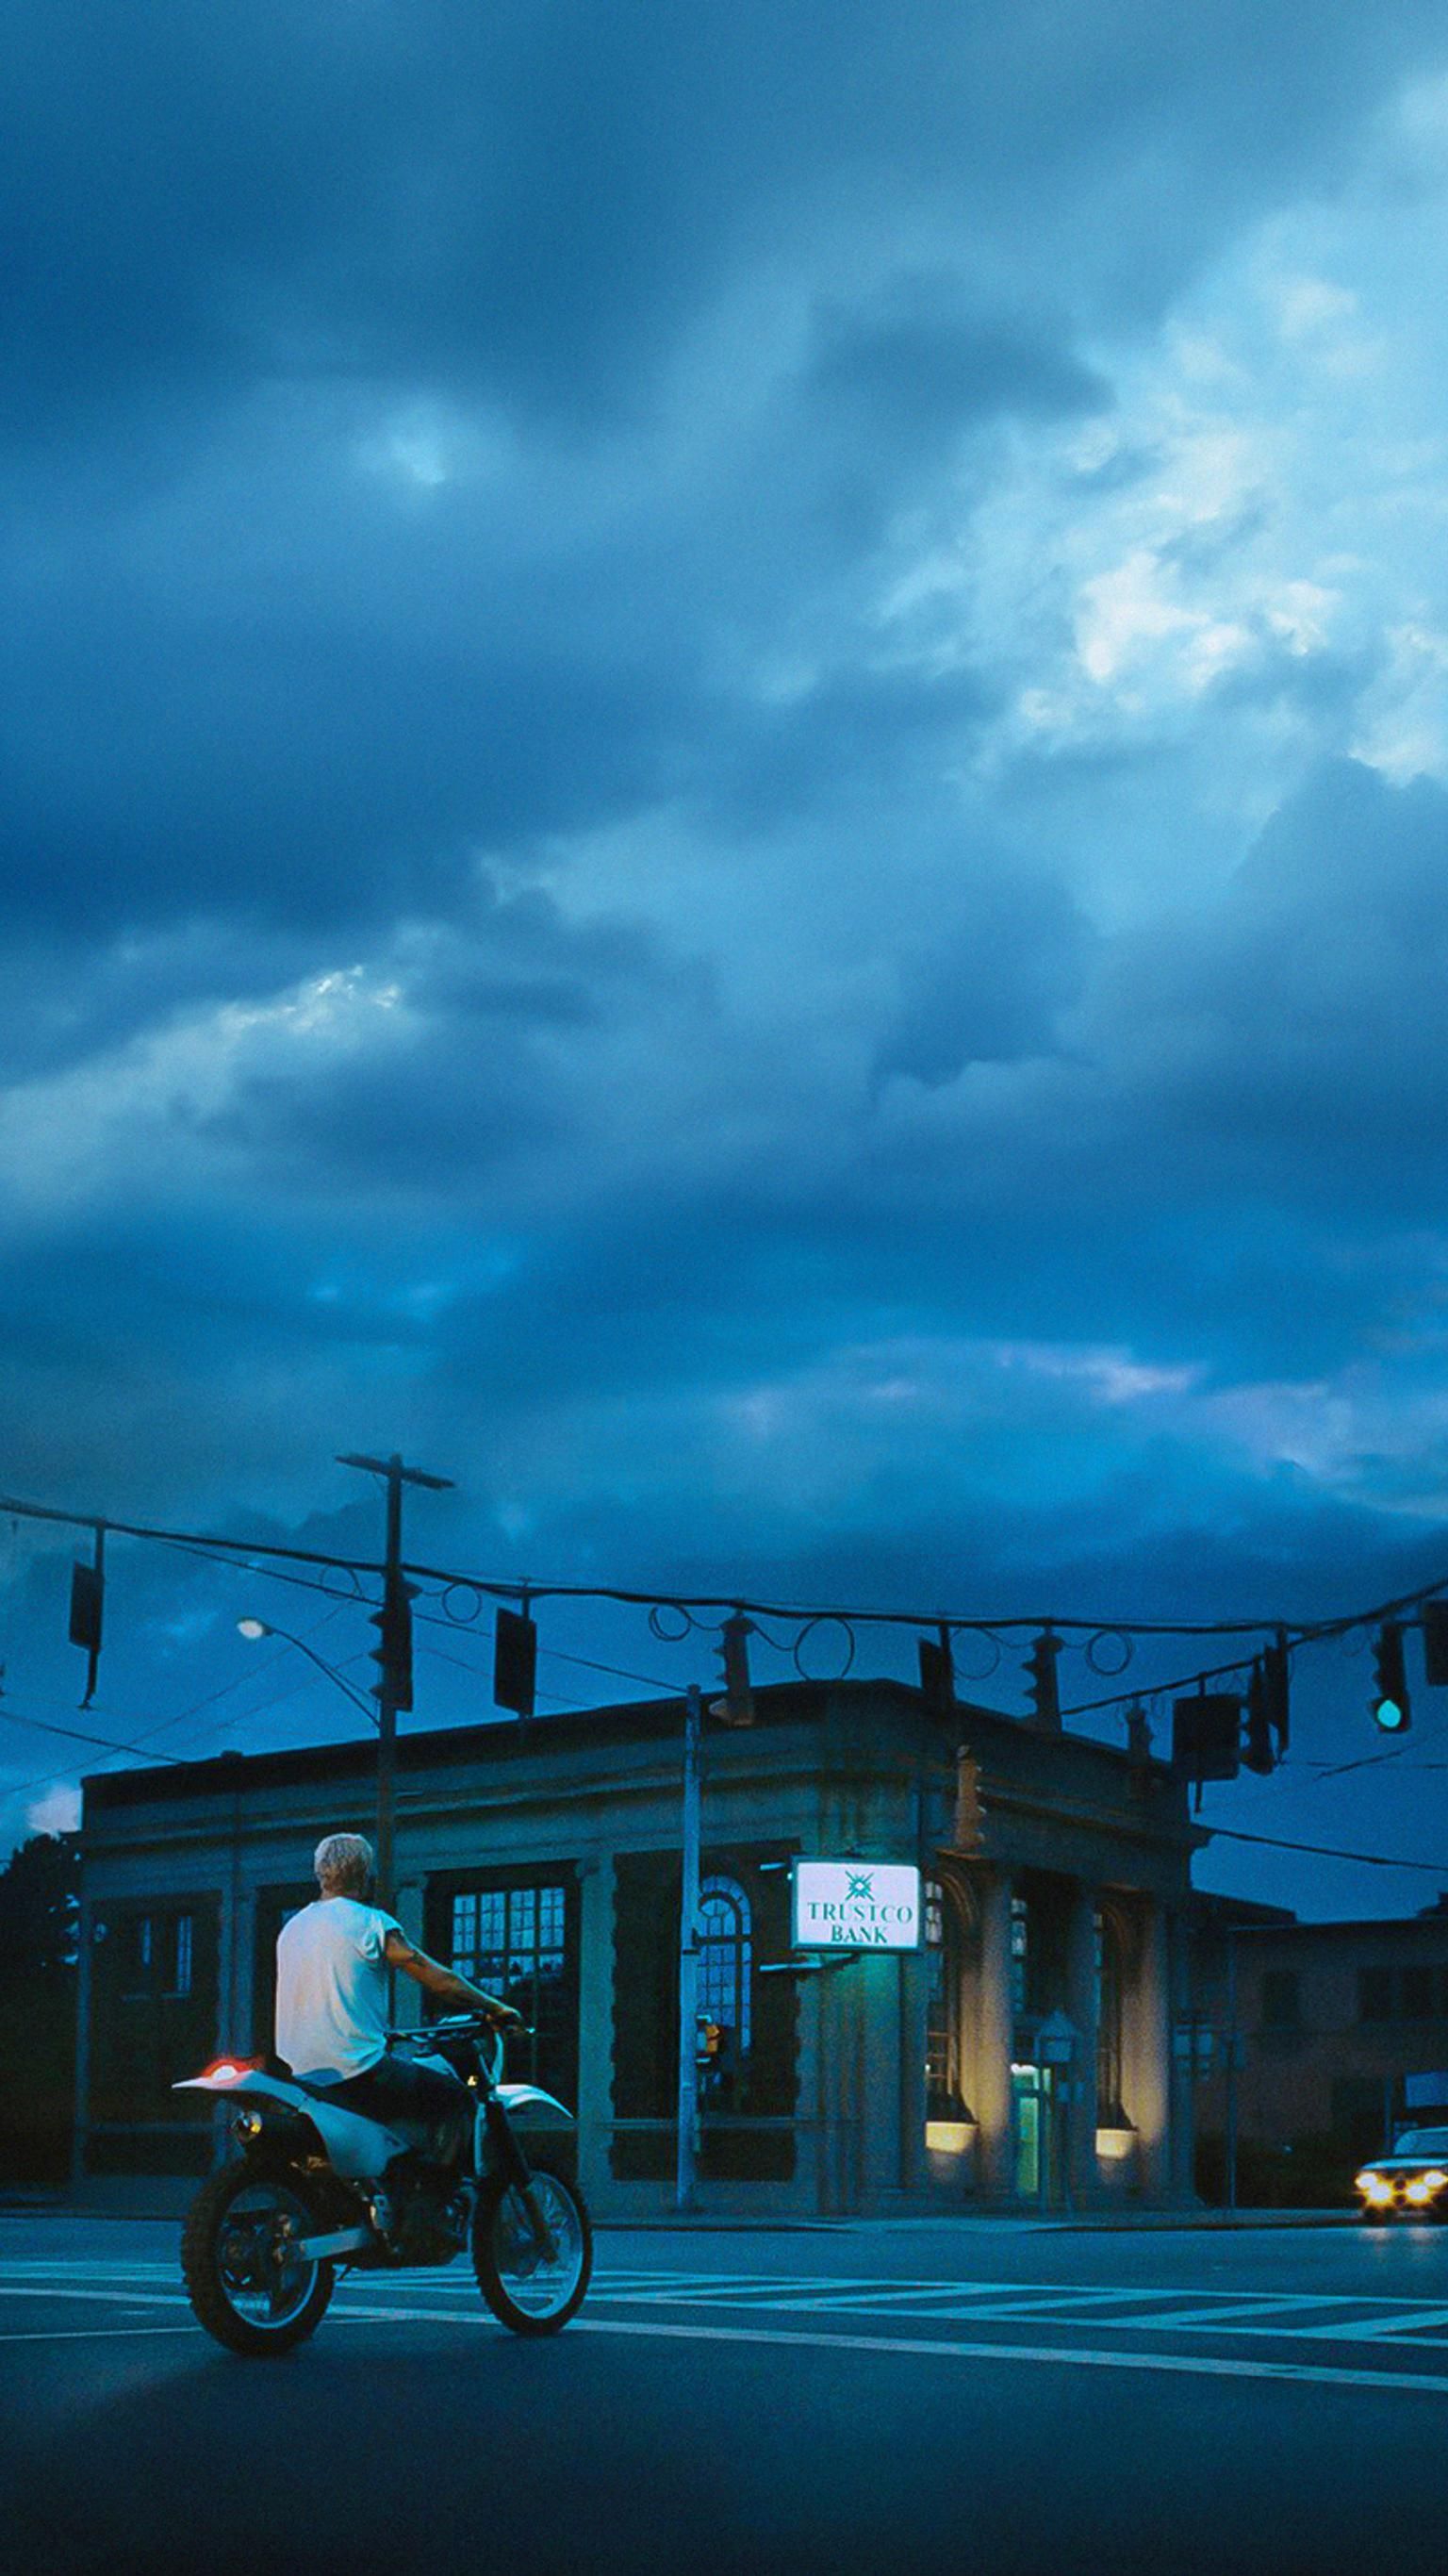 The Place Beyond the Pines (2013) Phone Wallpaper. Film stills, Phone wallpaper, Movie wallpaper